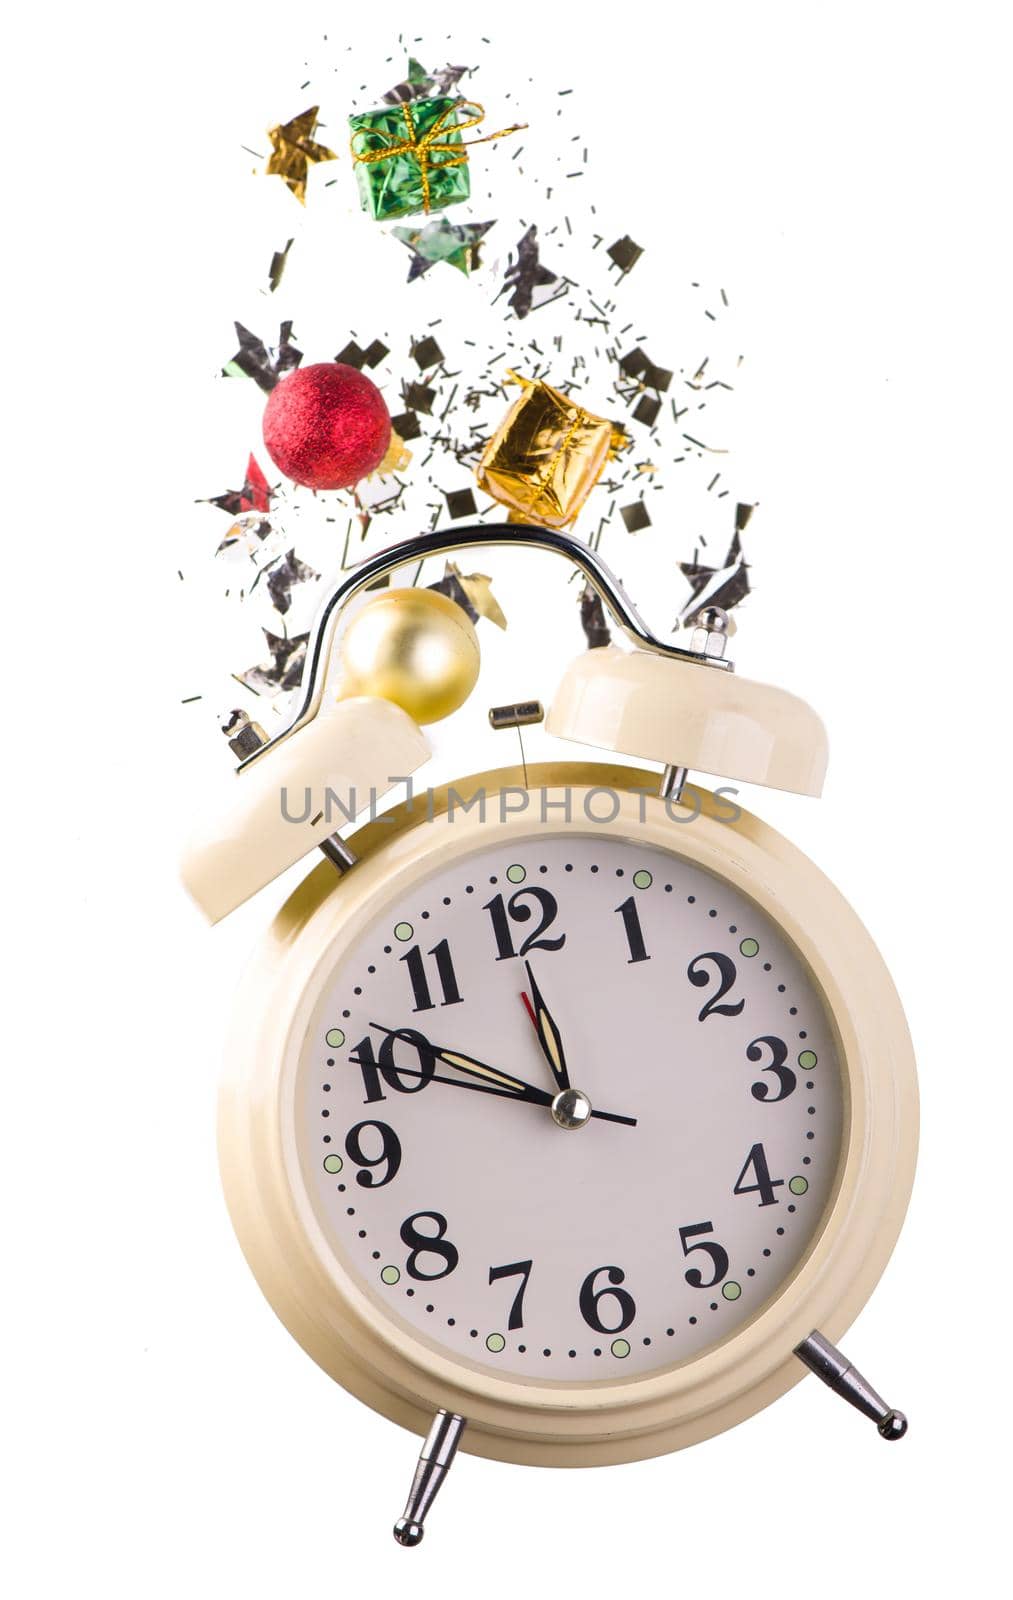 Christmas or New Year composition with retro alarm clock and Christmas decorations - stars, confetti, balls and gift boxes